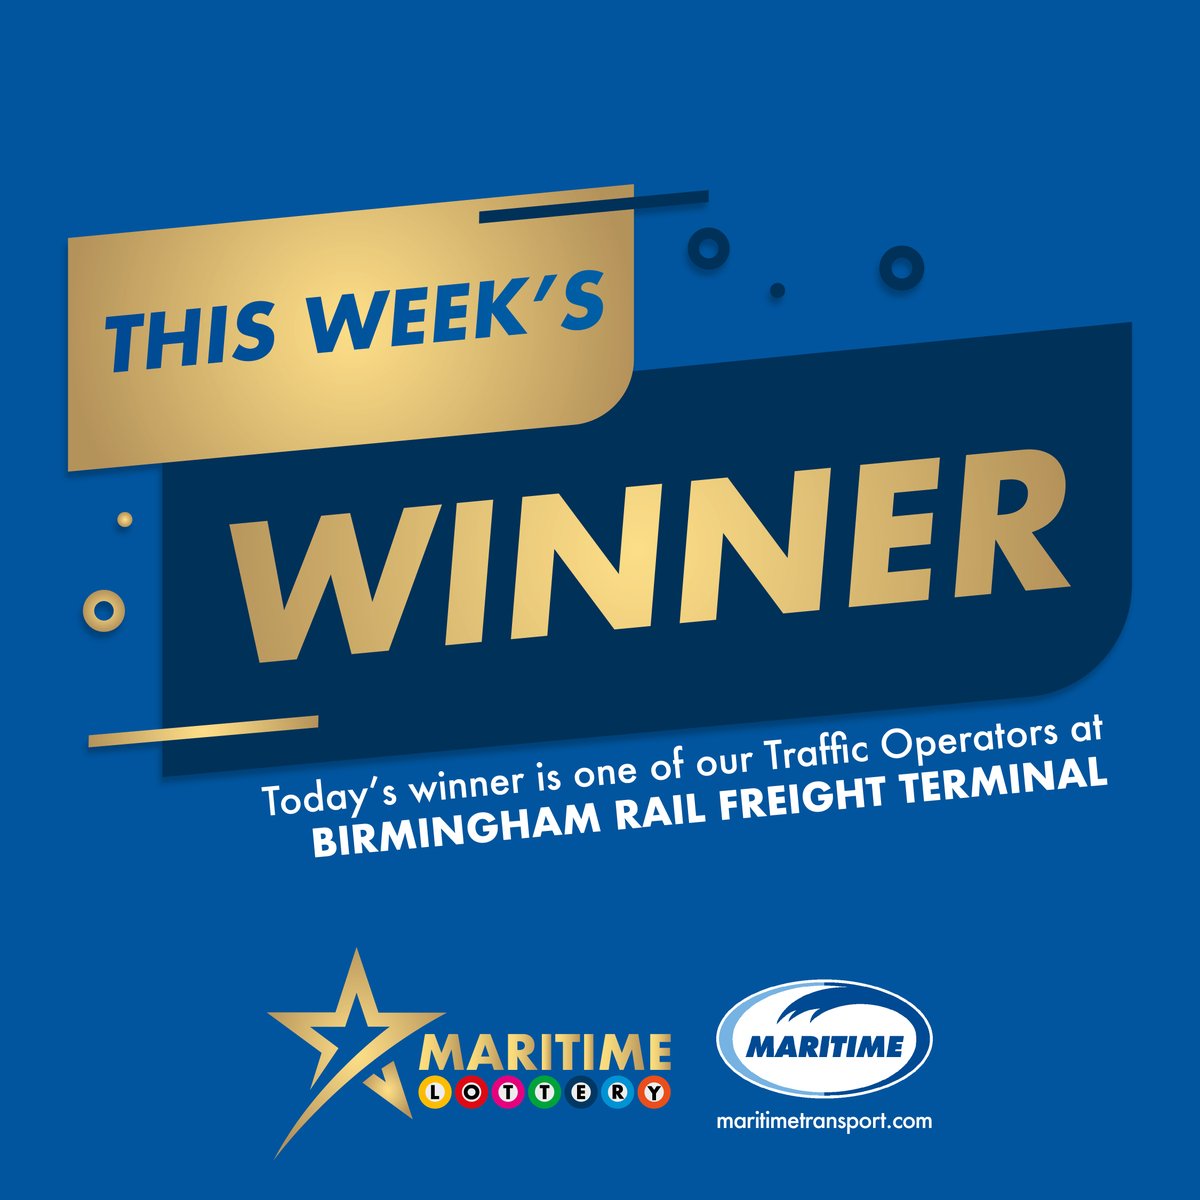 Congratulations to one of our Traffic Operators, based at Birmingham Rail Freight Terminal, who has just been announced as this week’s winner of our Maritime Lottery, taking home £1,000! Employees head to iWave to find out more. #mtllottery #maritimetransport